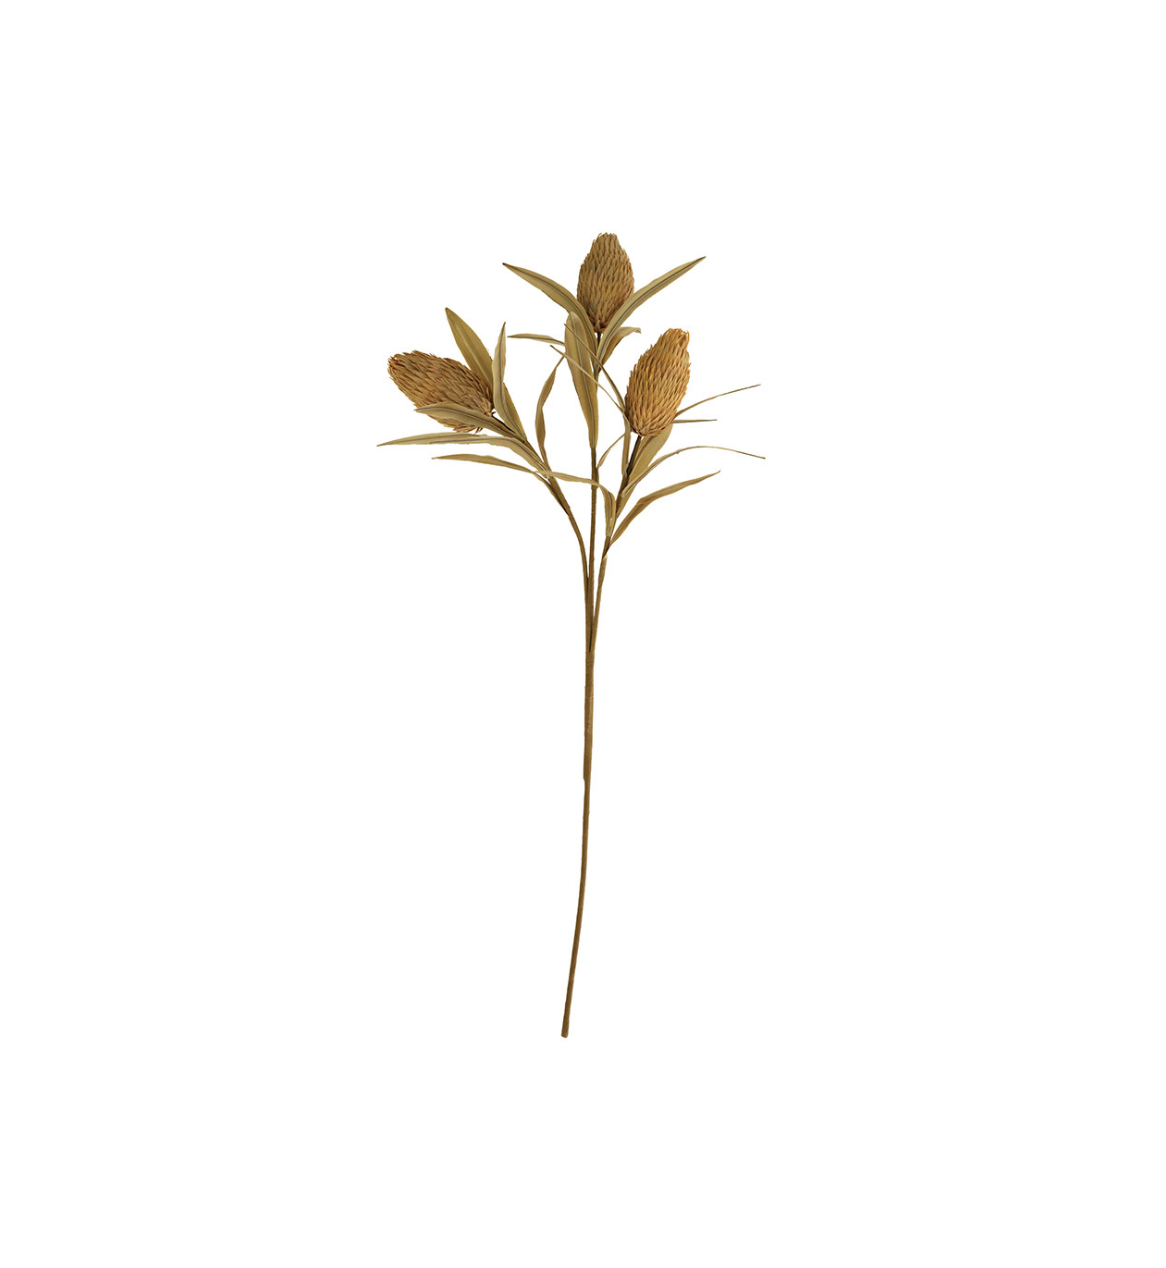 A single Cone Botanical Stem with elongated brown seed pods and narrow leaves, isolated on a white background, reminiscent of the natural beauty of Scottsdale, Arizona. (Kalalou, Inc)